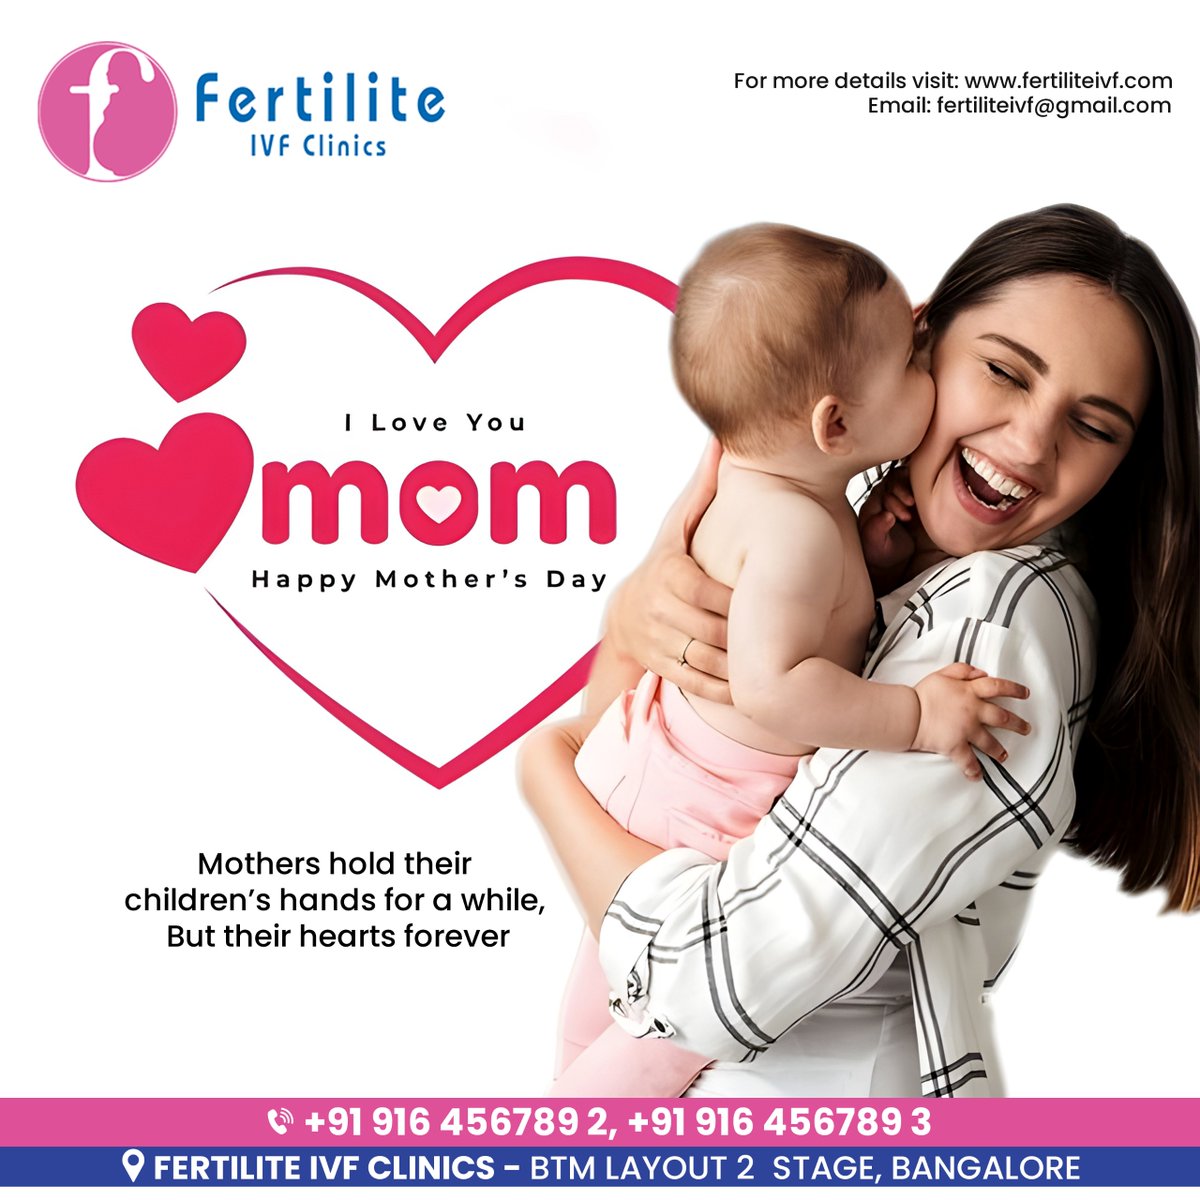 🌸 Happy Mother's Day 🌸

Celebrate the unbreakable bond between you and your mom with FERTILITE IVF CLINICS! 💖

📞 +91 916 4567892, +91 916 4567893
🌐 fertiliteivf.com
✉️ fertiliteivf@gmail.com

#MothersDay #FertiliteIVF #IVFJourney #BangaloreIVF #MotherhoodJourney